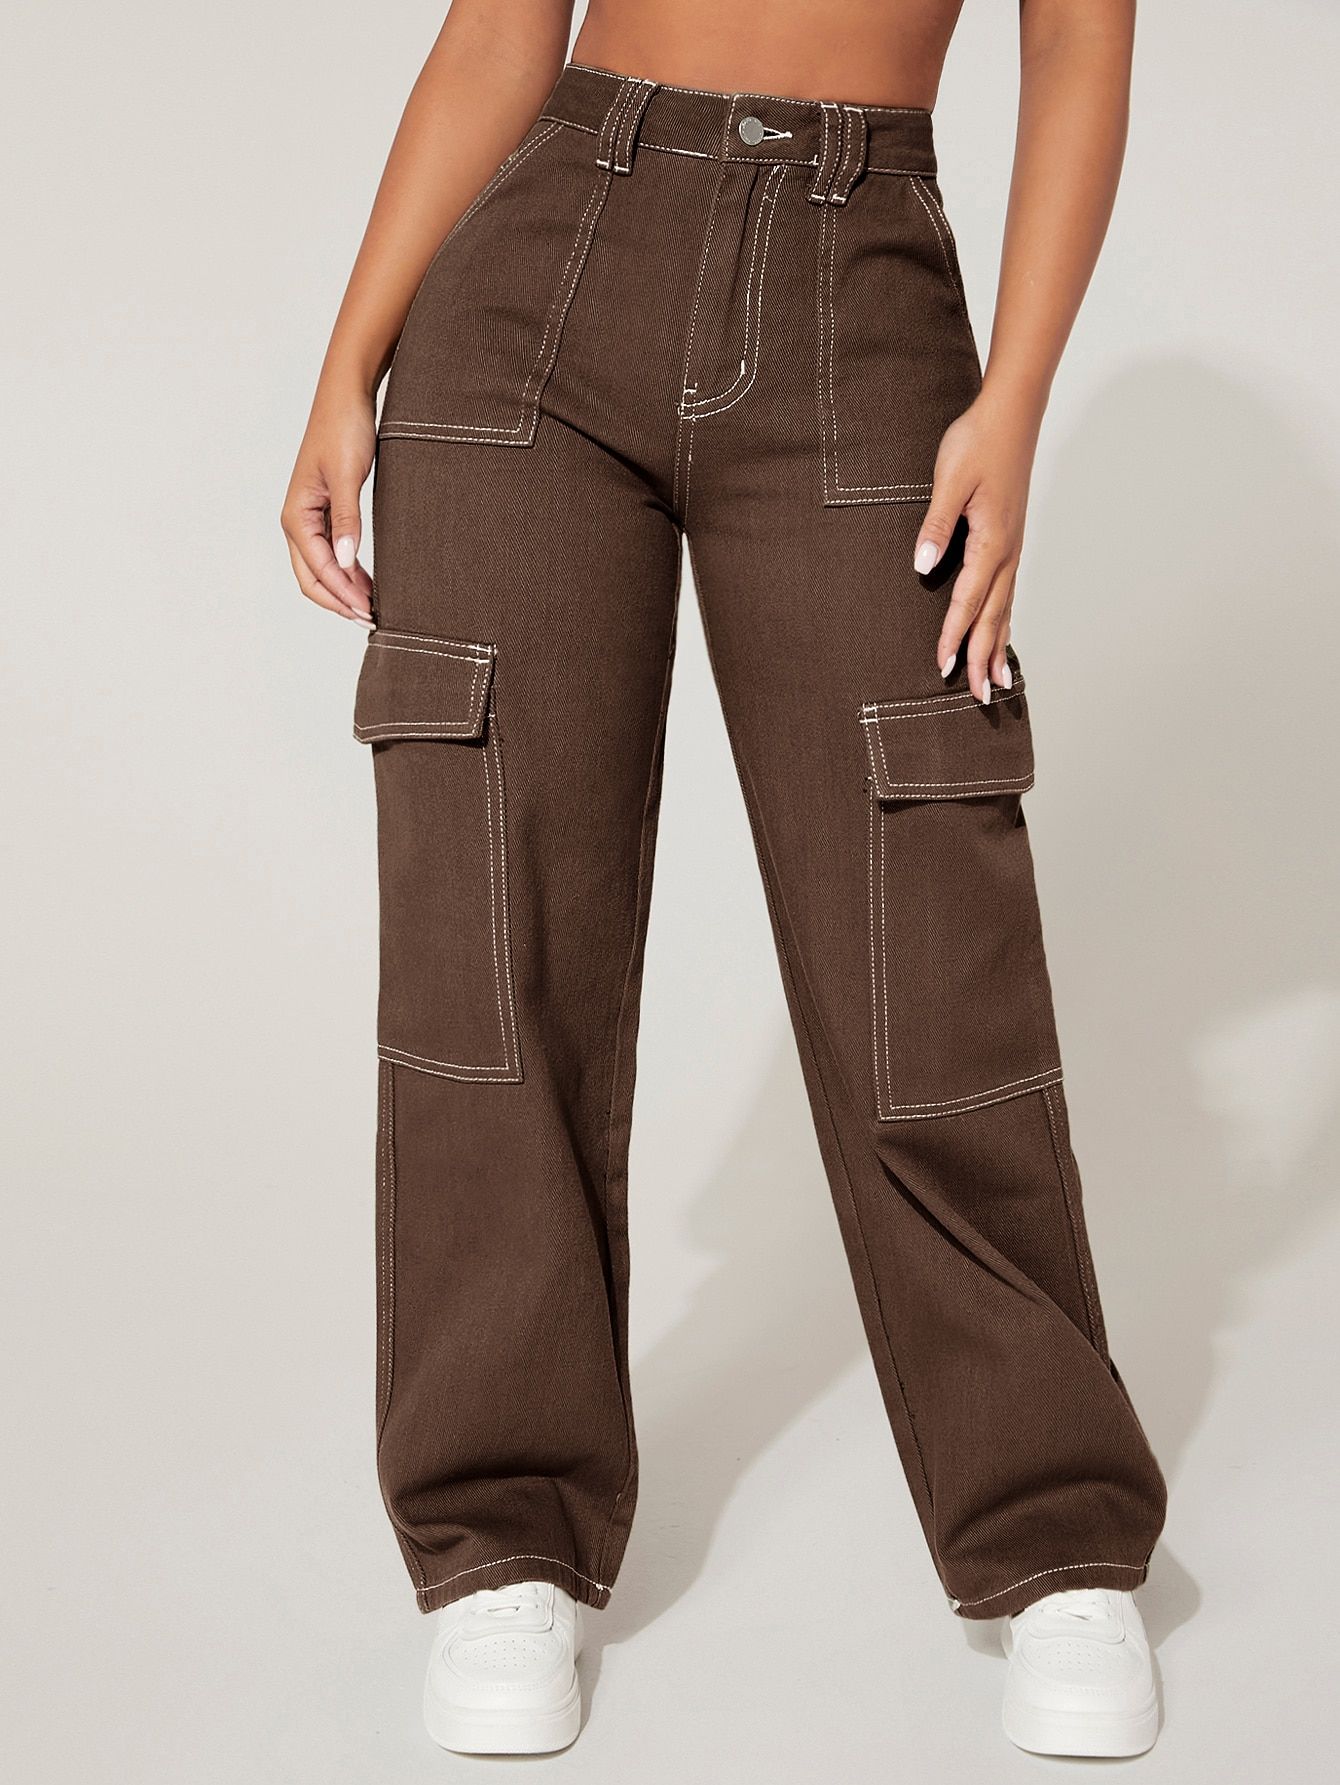 Make your own style icon with stylish
cargo pants